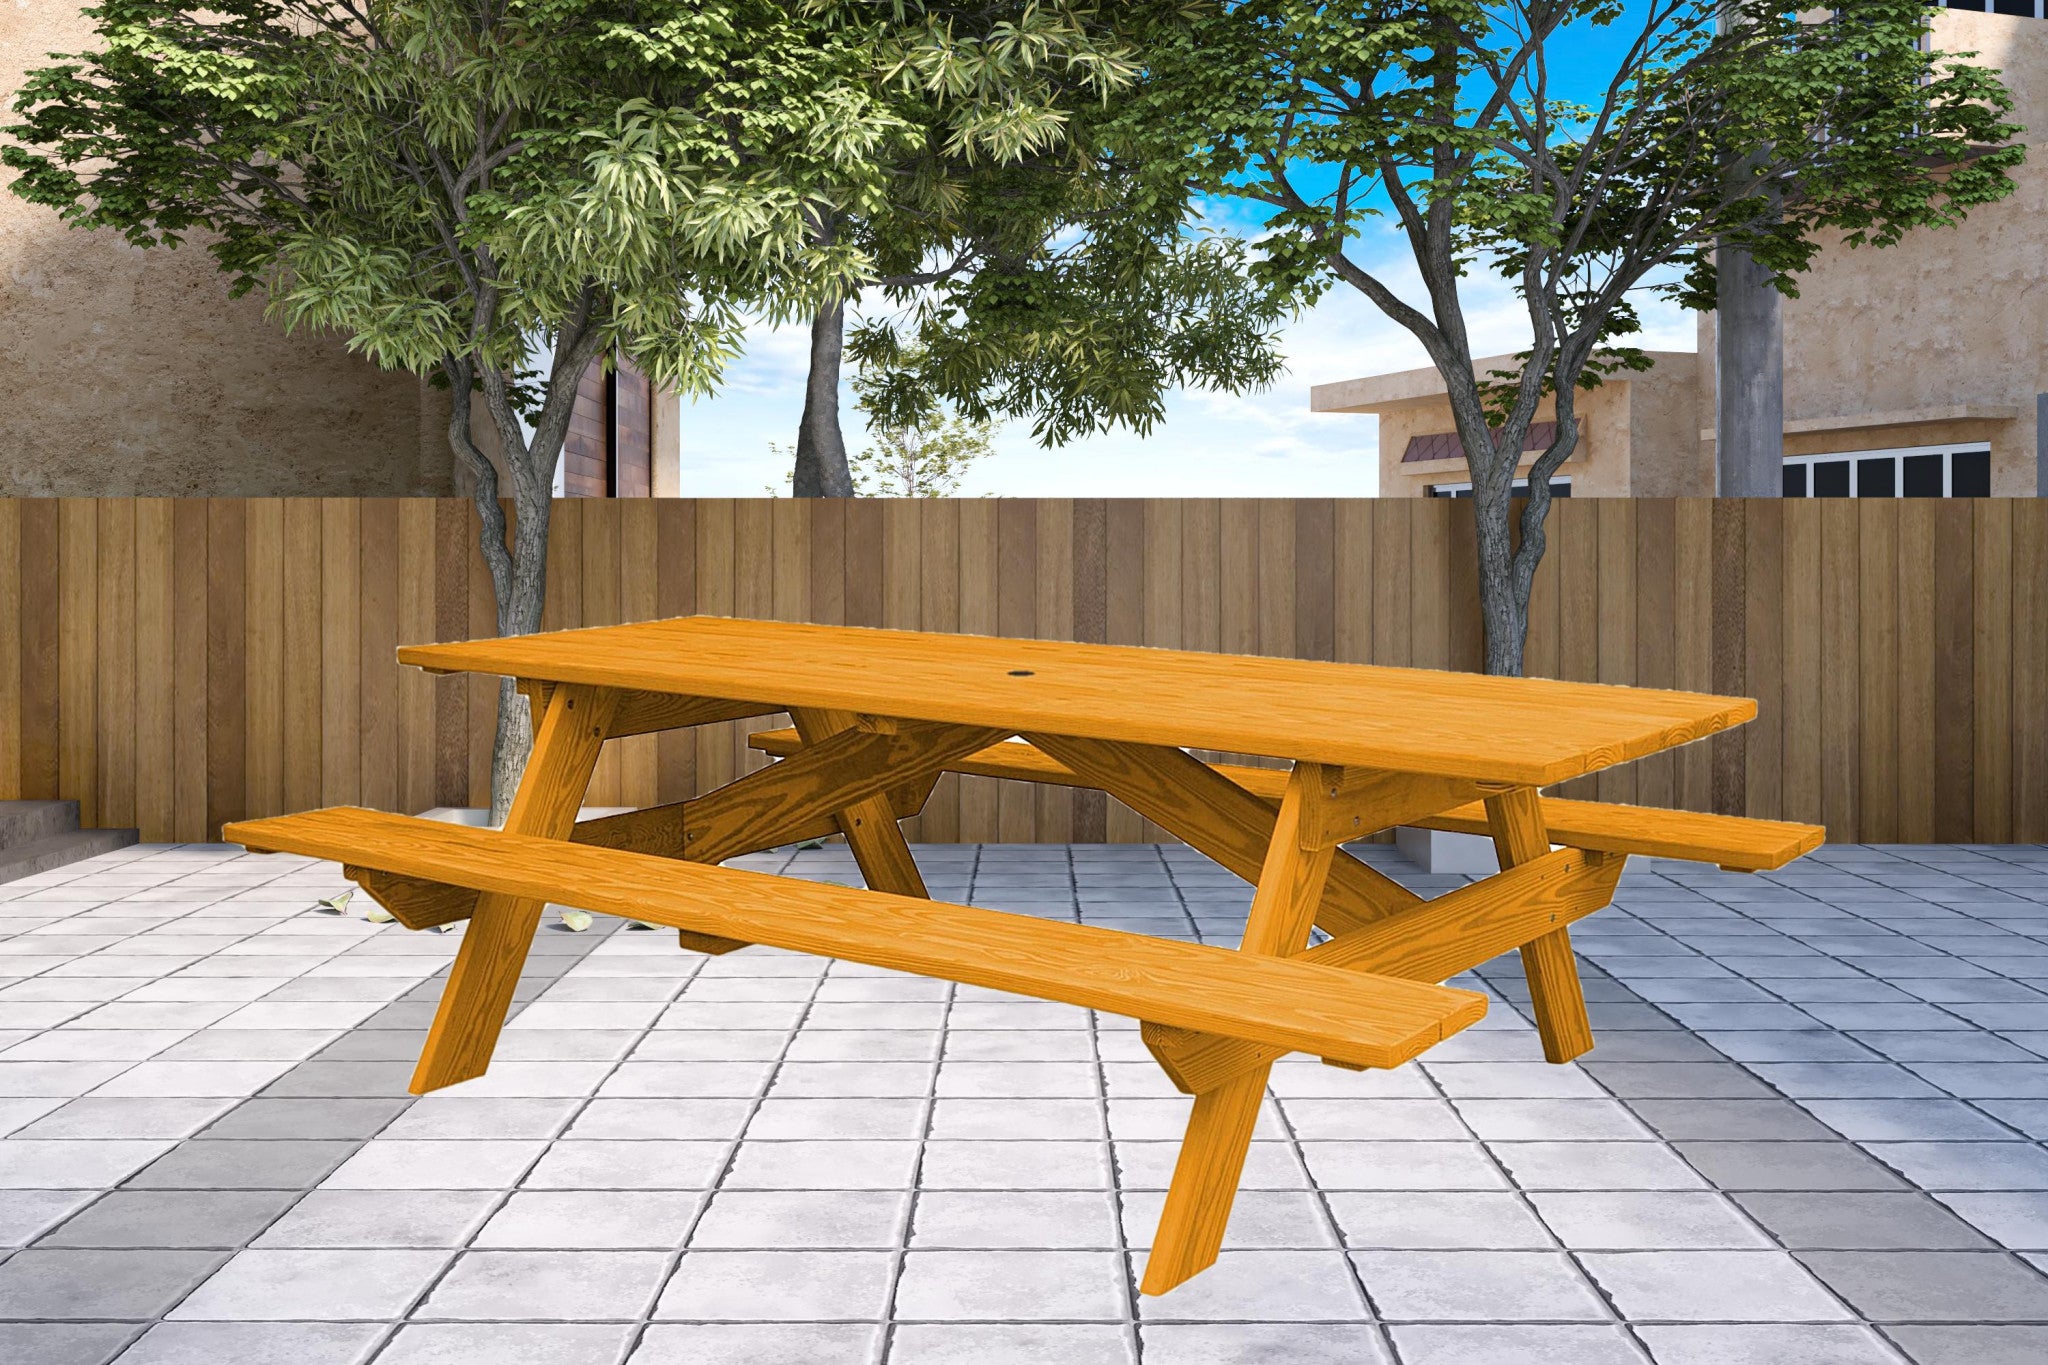 94" Natural Solid Wood Outdoor Picnic Table with Umbrella Hole